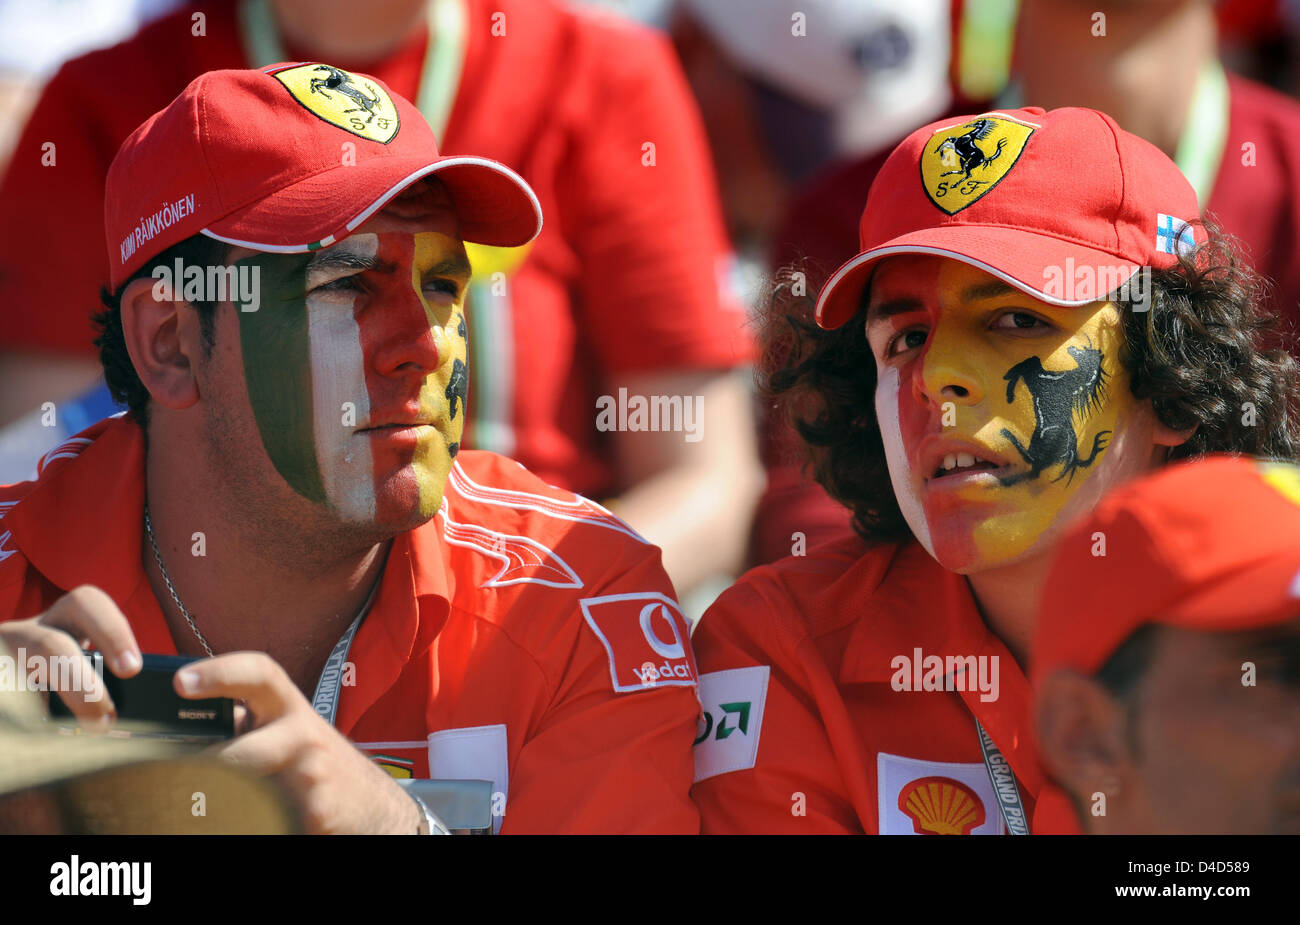 A group of Ferrari fans watches the Formula 1 Australian Grabnd Prix at Albert Park circuit in Melbourne, Australia, 16 March 2008. British Lewis Hamilton of McLaren-Mercedes homed a pole-to-flag victory in an action-packed and crash-strewn Australian GP. Photo: Gero Breloer Stock Photo